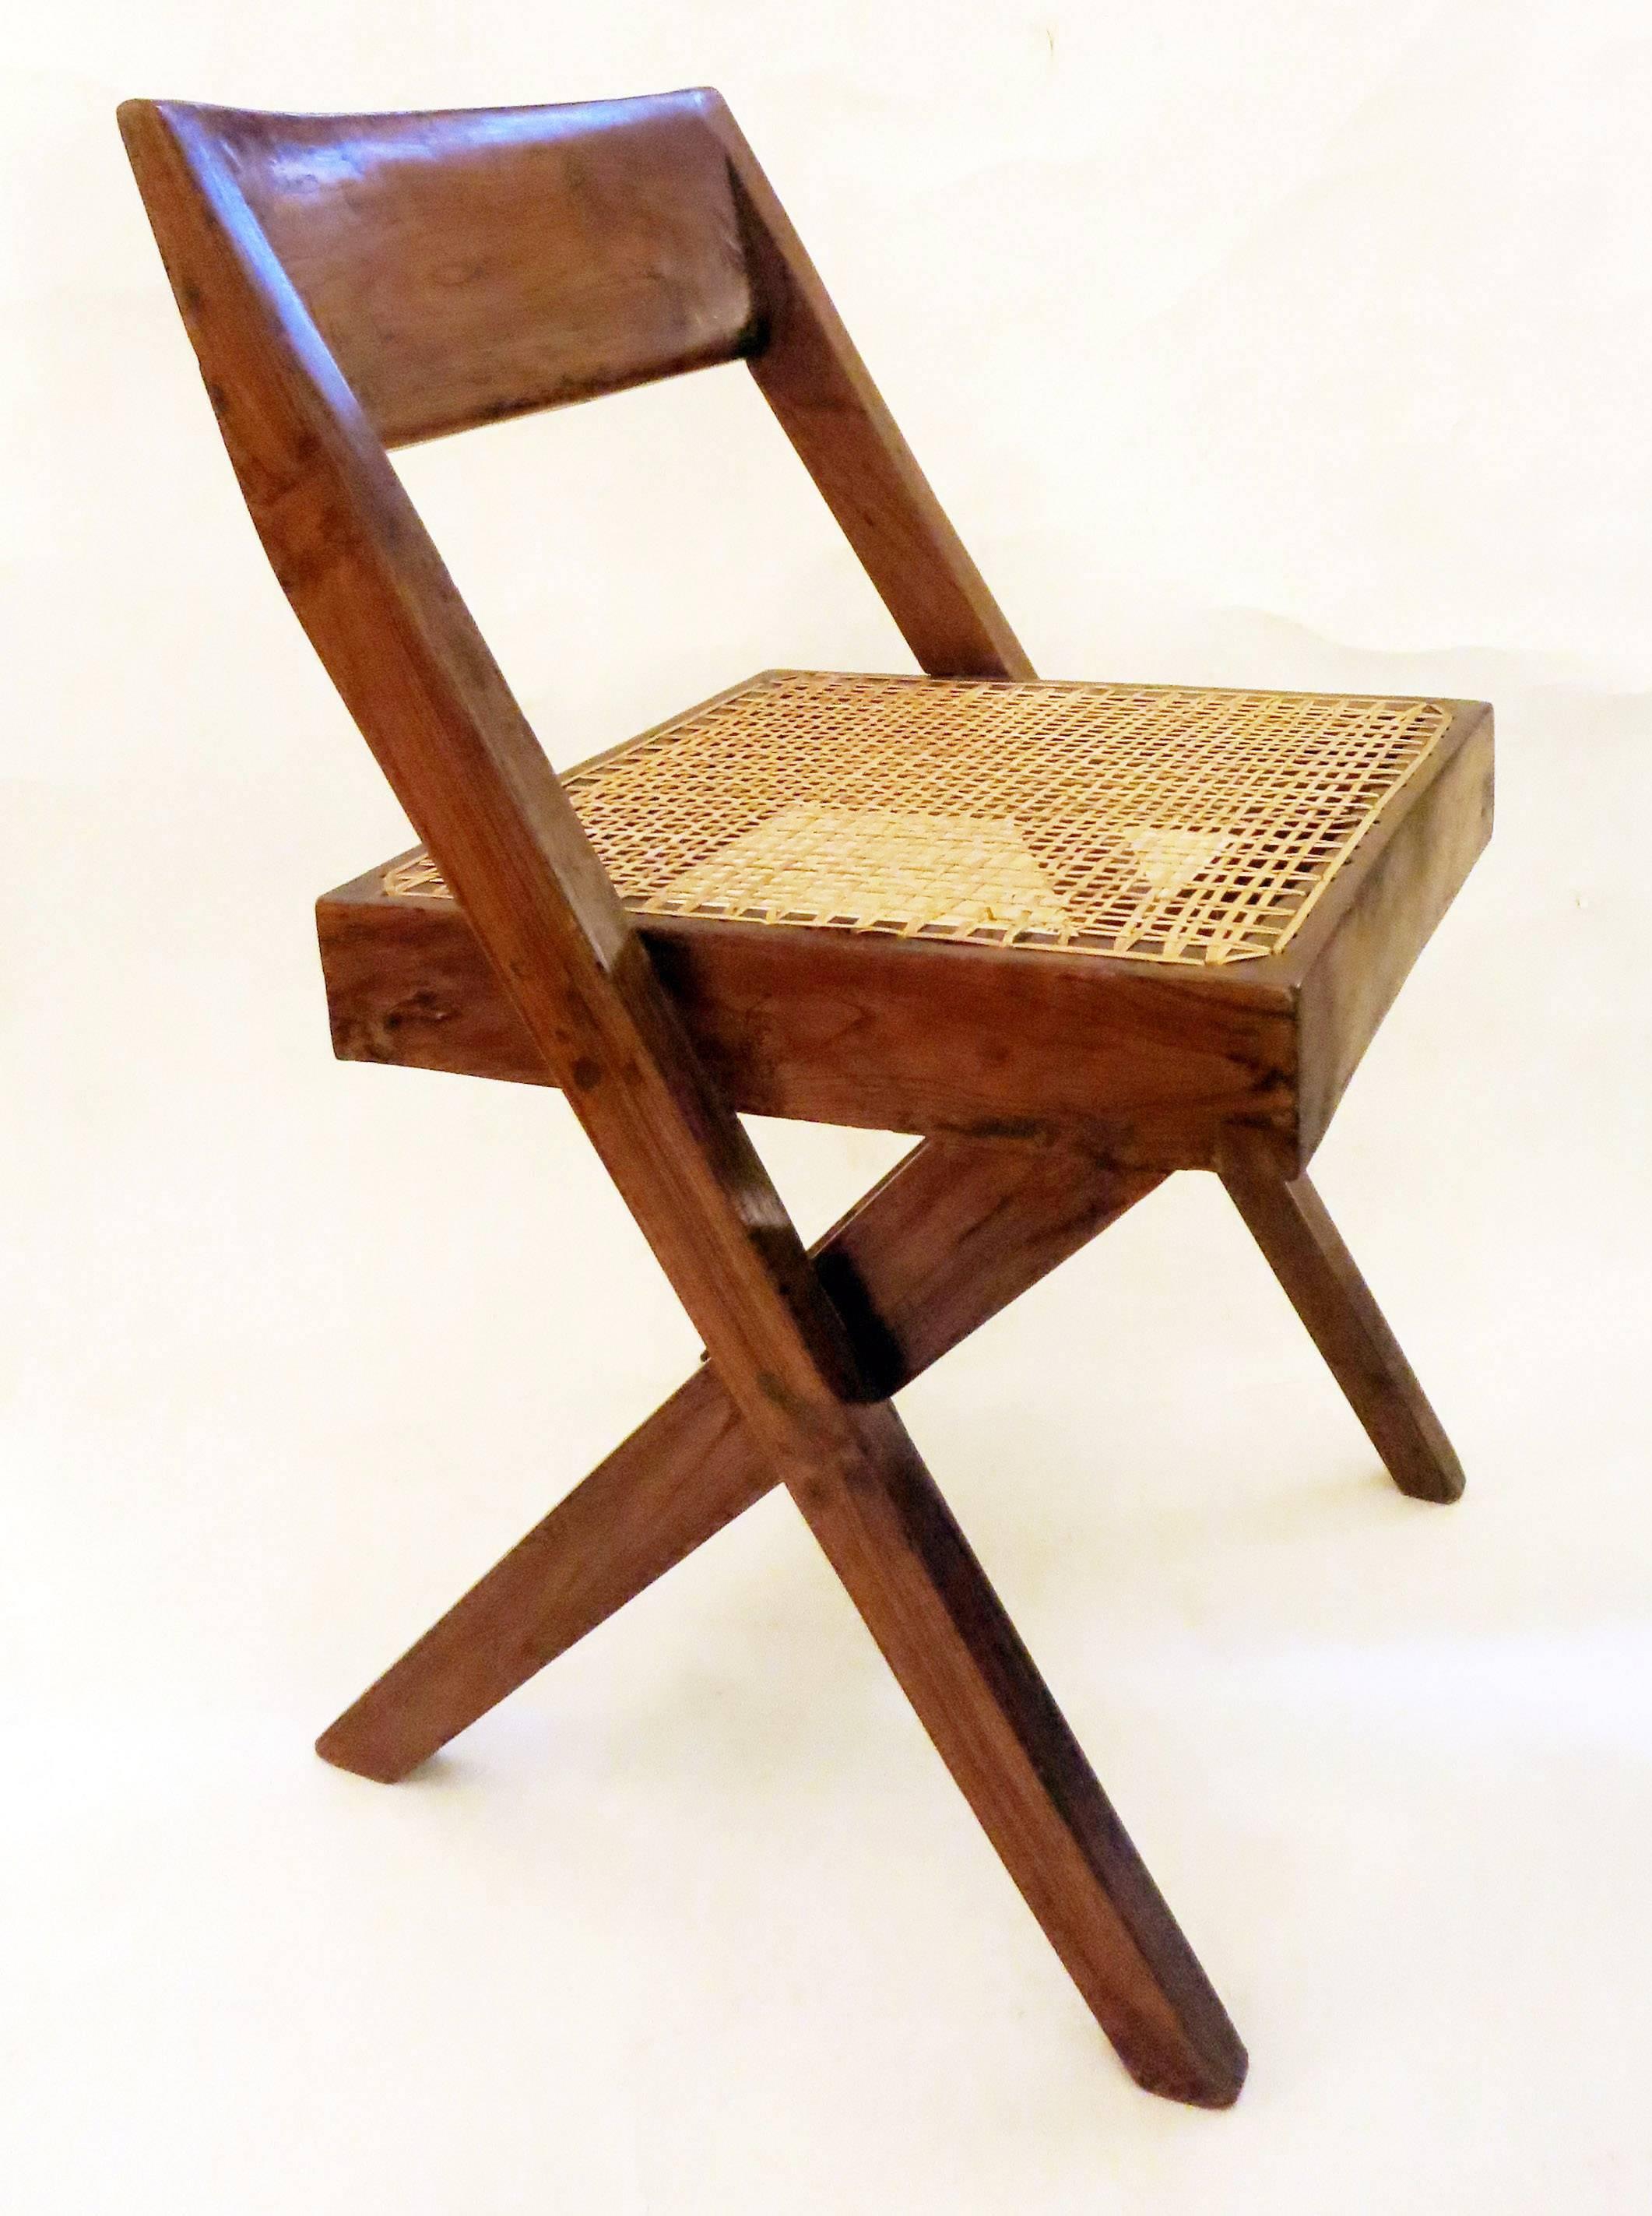 Chair designed by Pierre Jeanneret for the Le Corbusier Punjab Library in Chandigarh, India, in the 1950s.
Solid teak and cane.